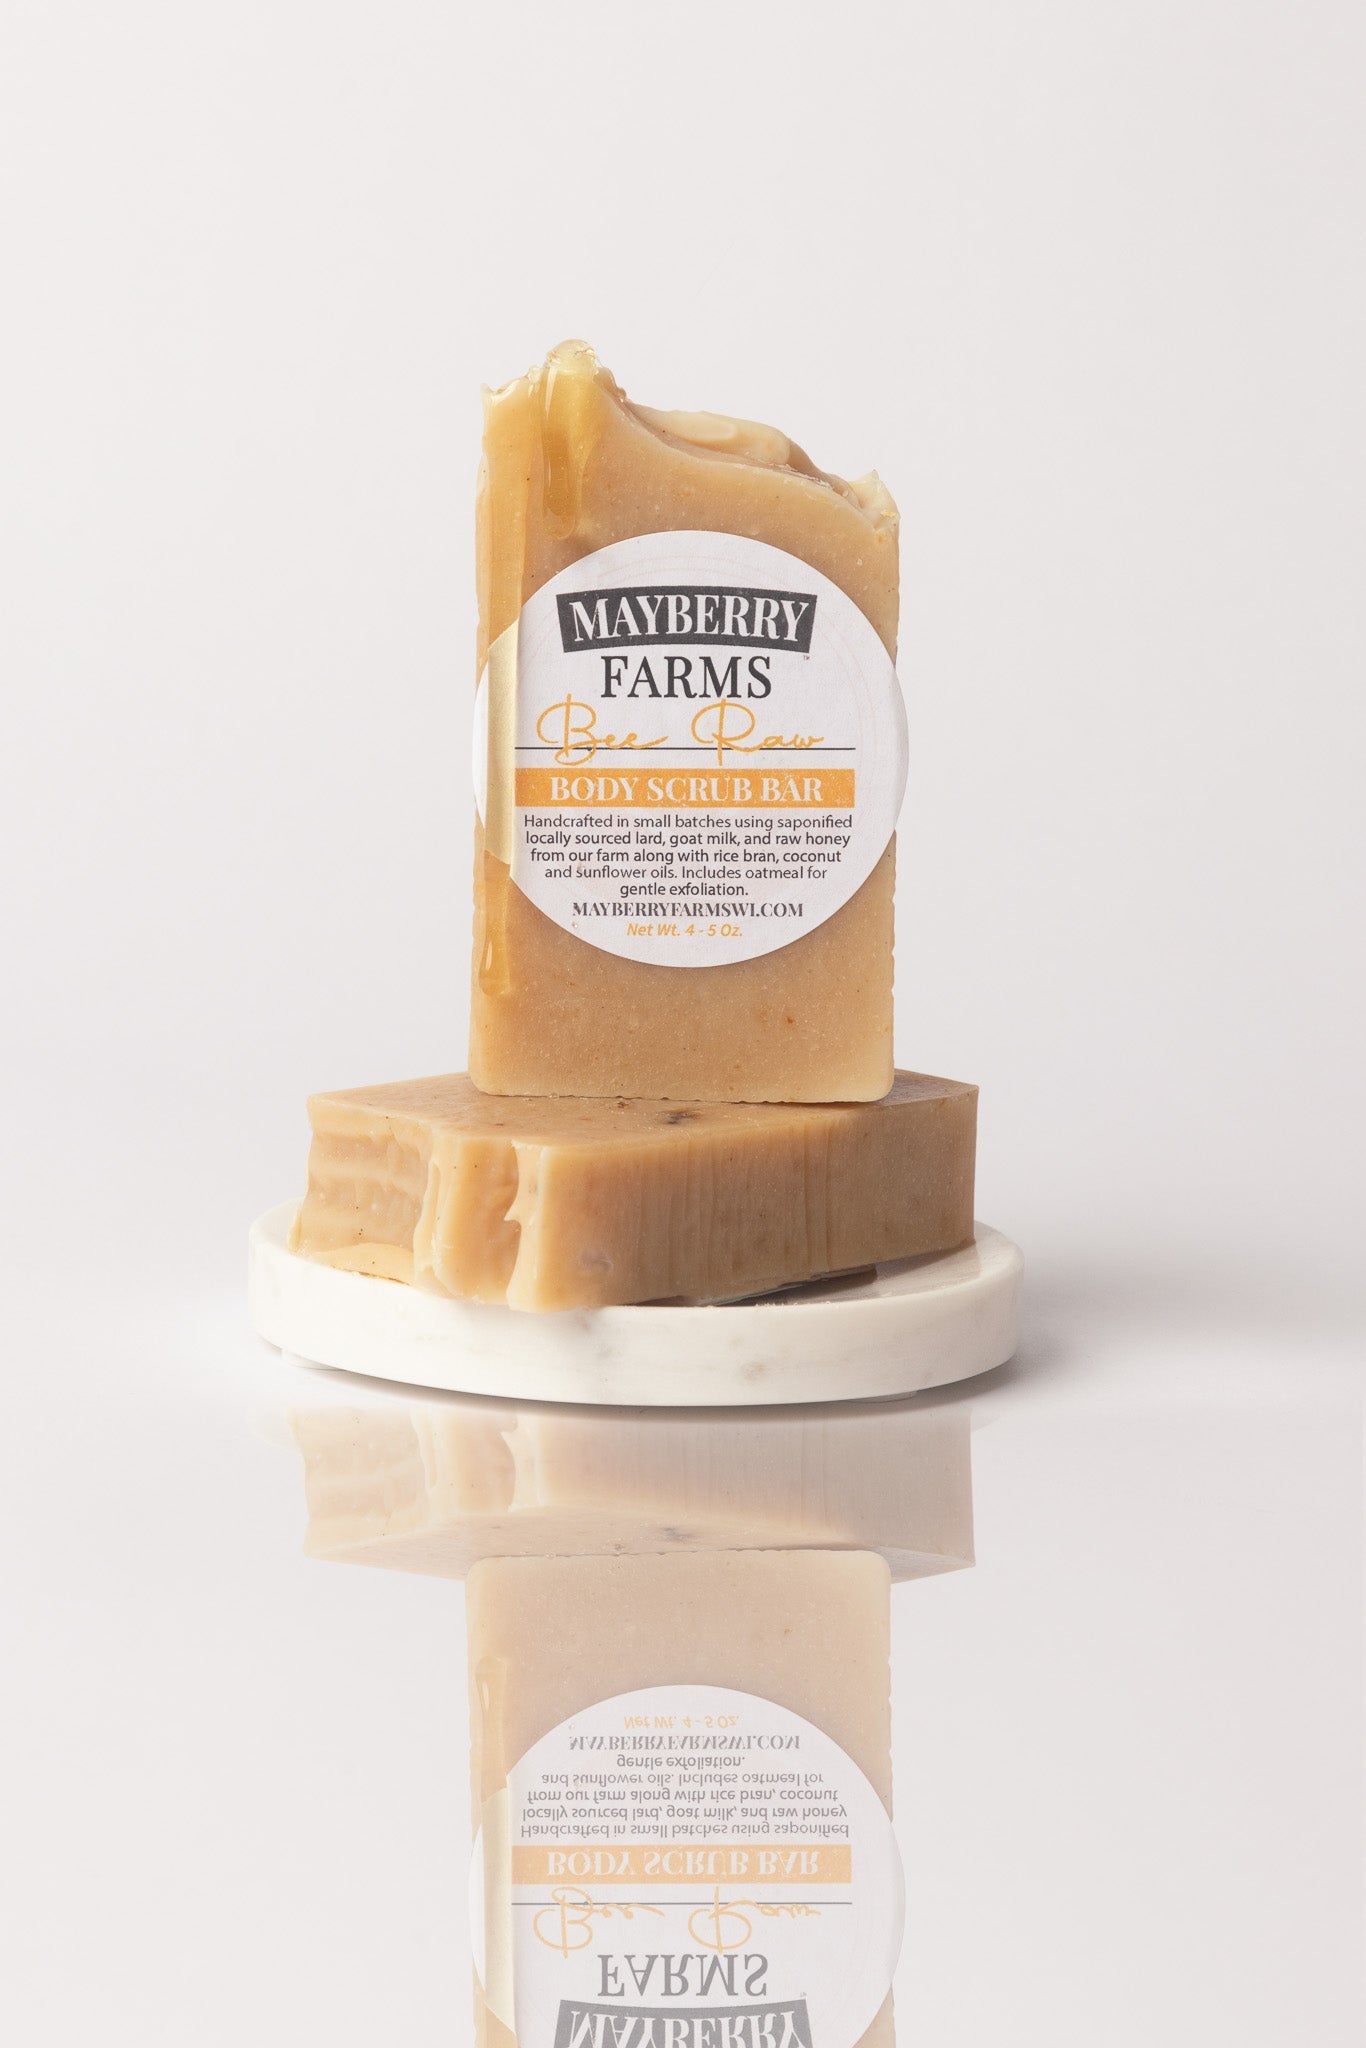 Unscented Lard, Raw Honey and Goat Milk Body Bar Soap - Mayberry Farms